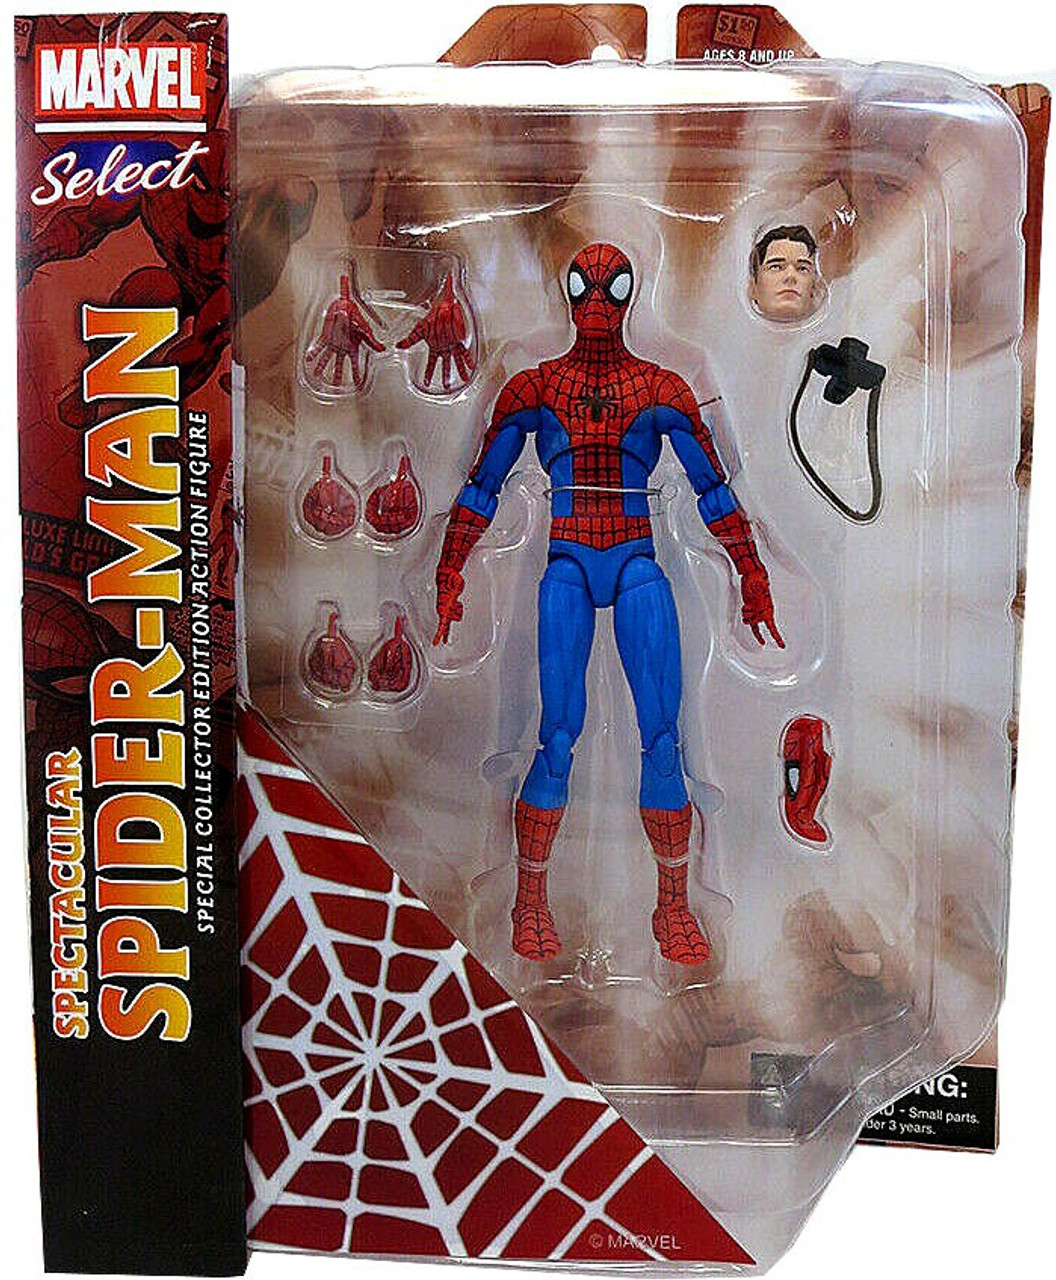 Marvel Marvel Select Spectacular SpiderMan 7 Action Figure 7inch